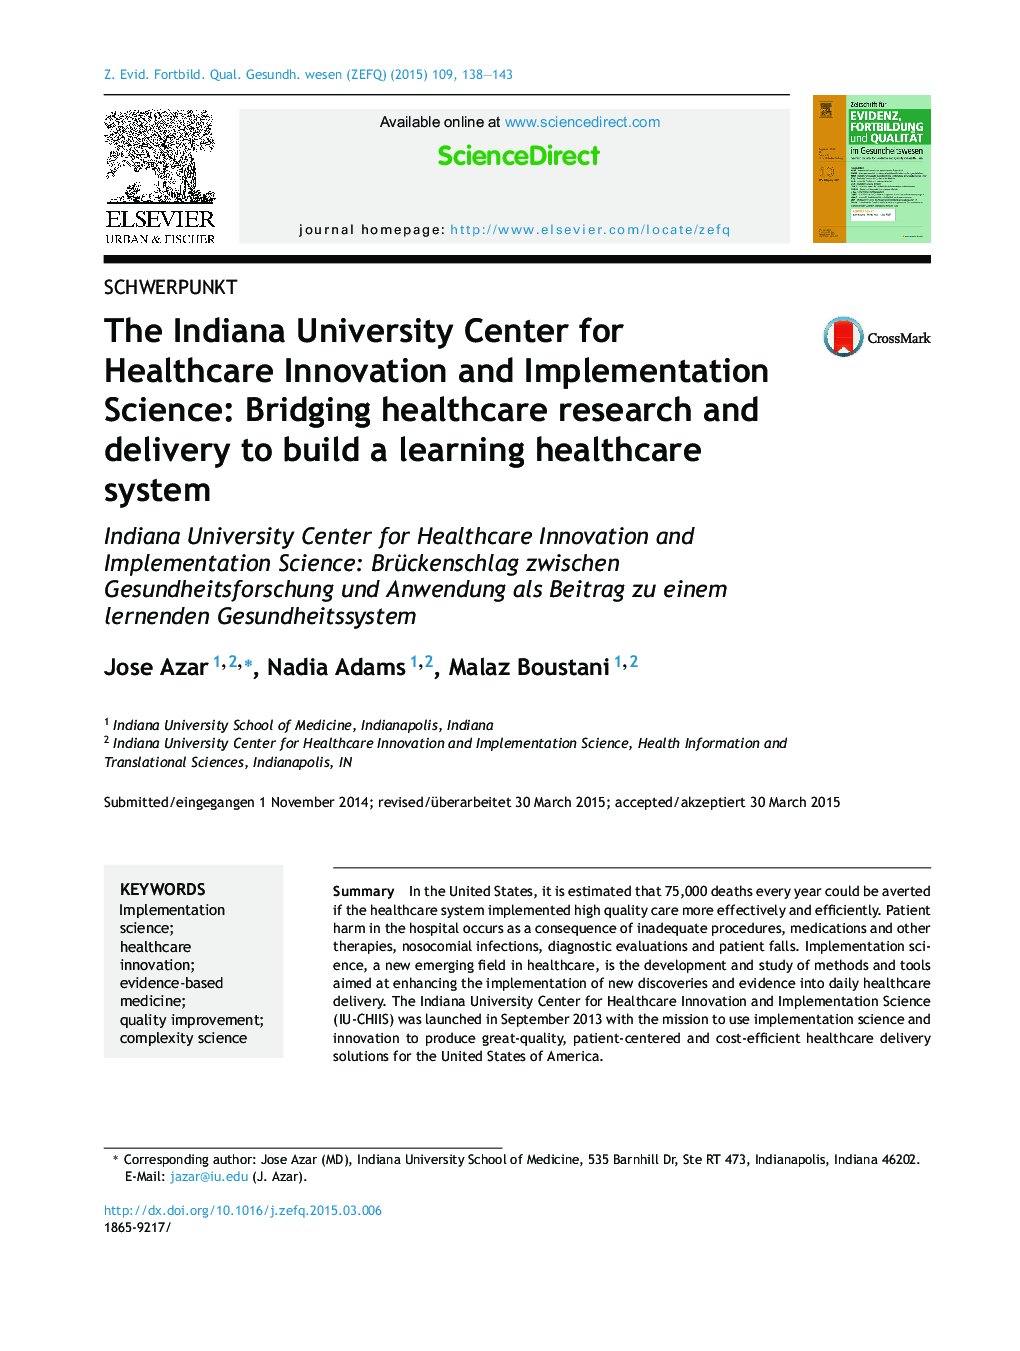 The Indiana University Center for Healthcare Innovation and Implementation Science: Bridging healthcare research and delivery to build a learning healthcare system